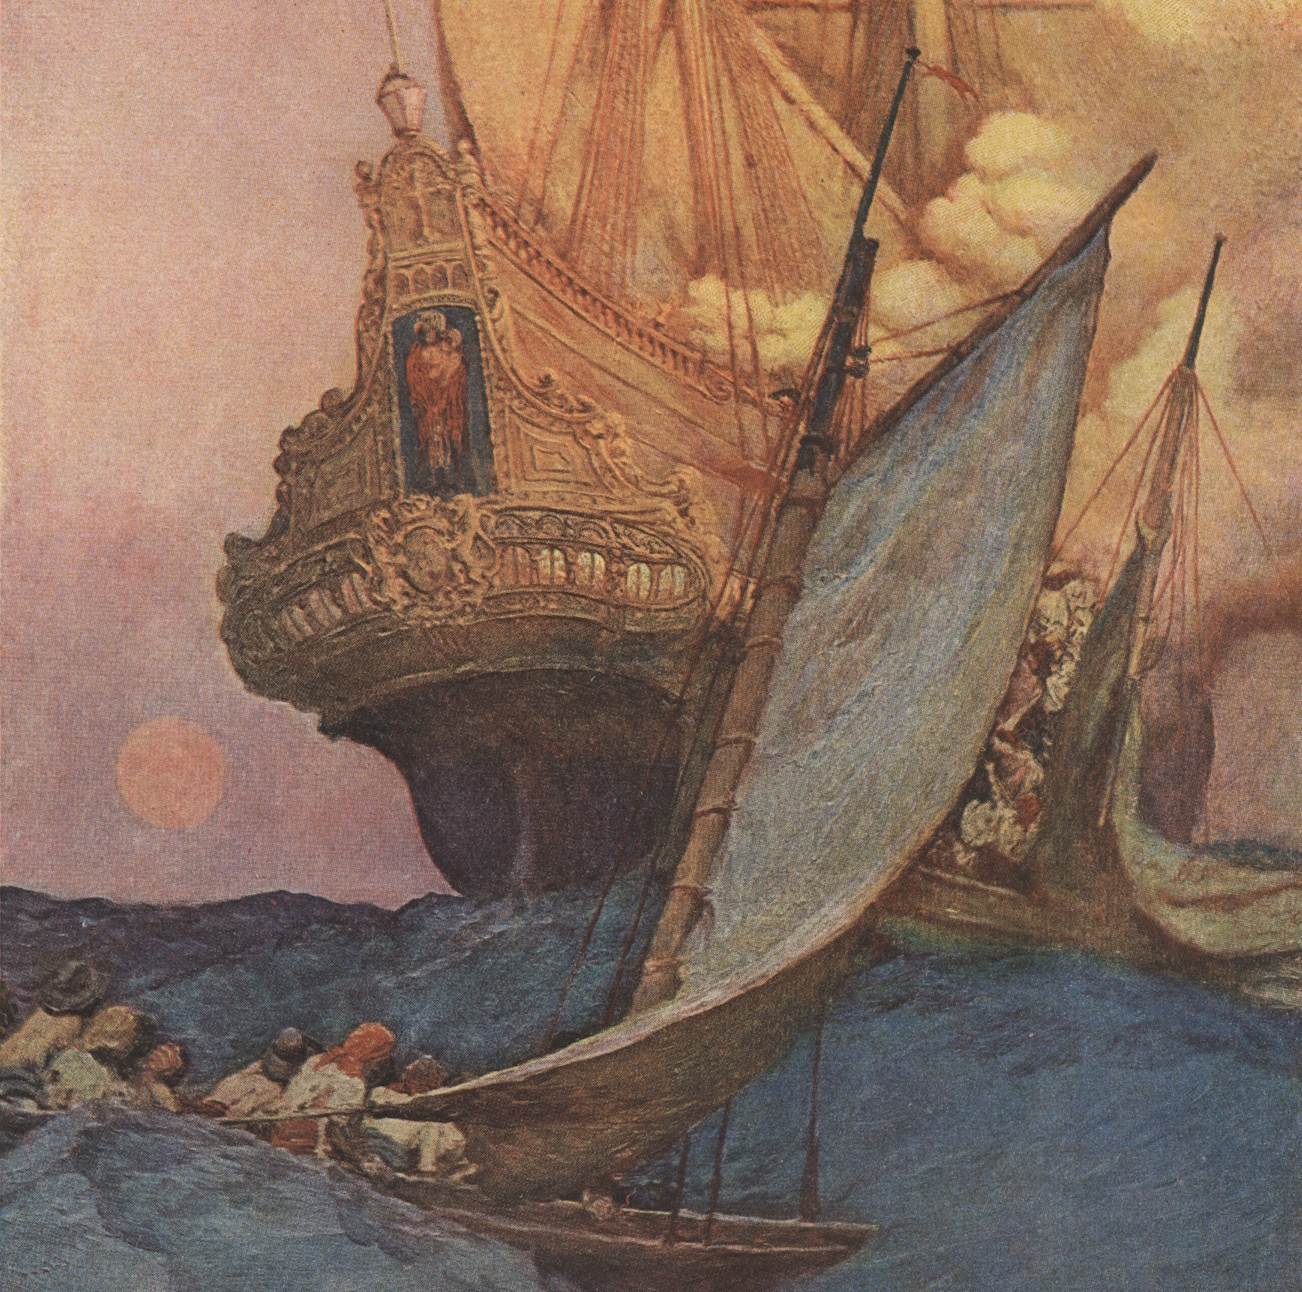 Howard Pyle’s Famous “An Attack on a Spanish Galleon” — and Some Real Galleons Too!